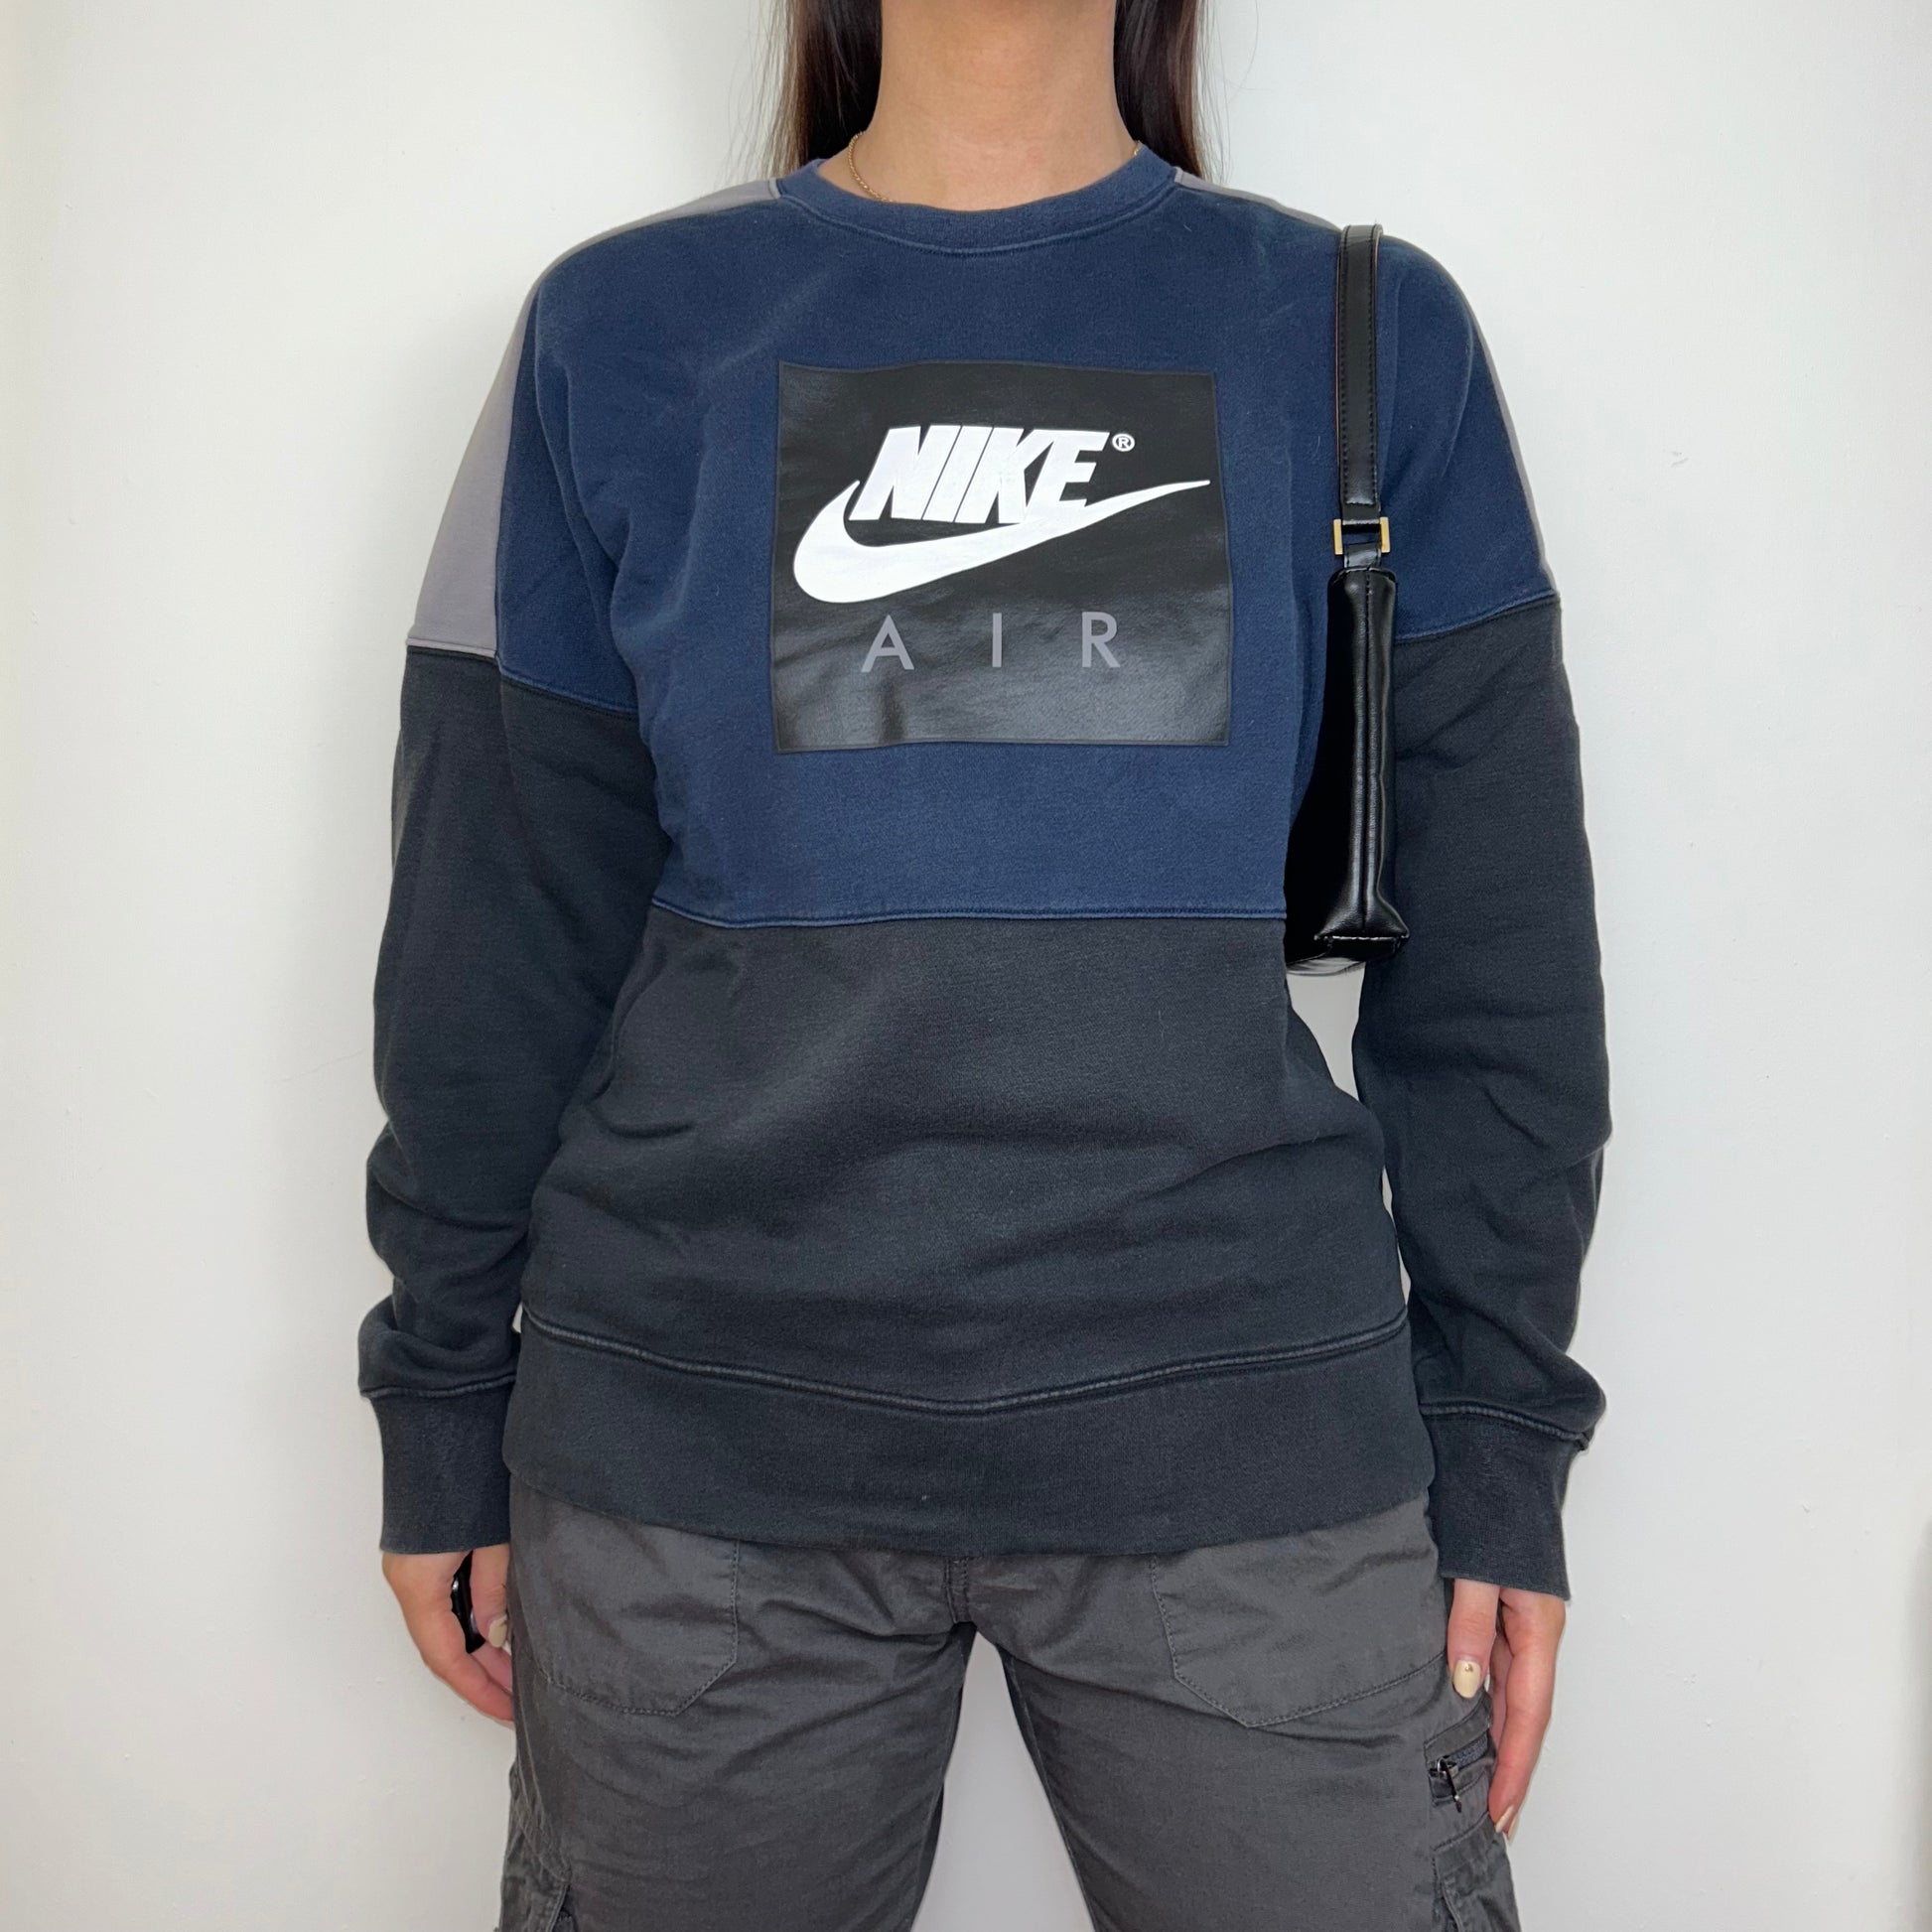 black and navy sweatshirt with white nike logo shown on a model wearing grey cargo trousers and a black shoulder bag